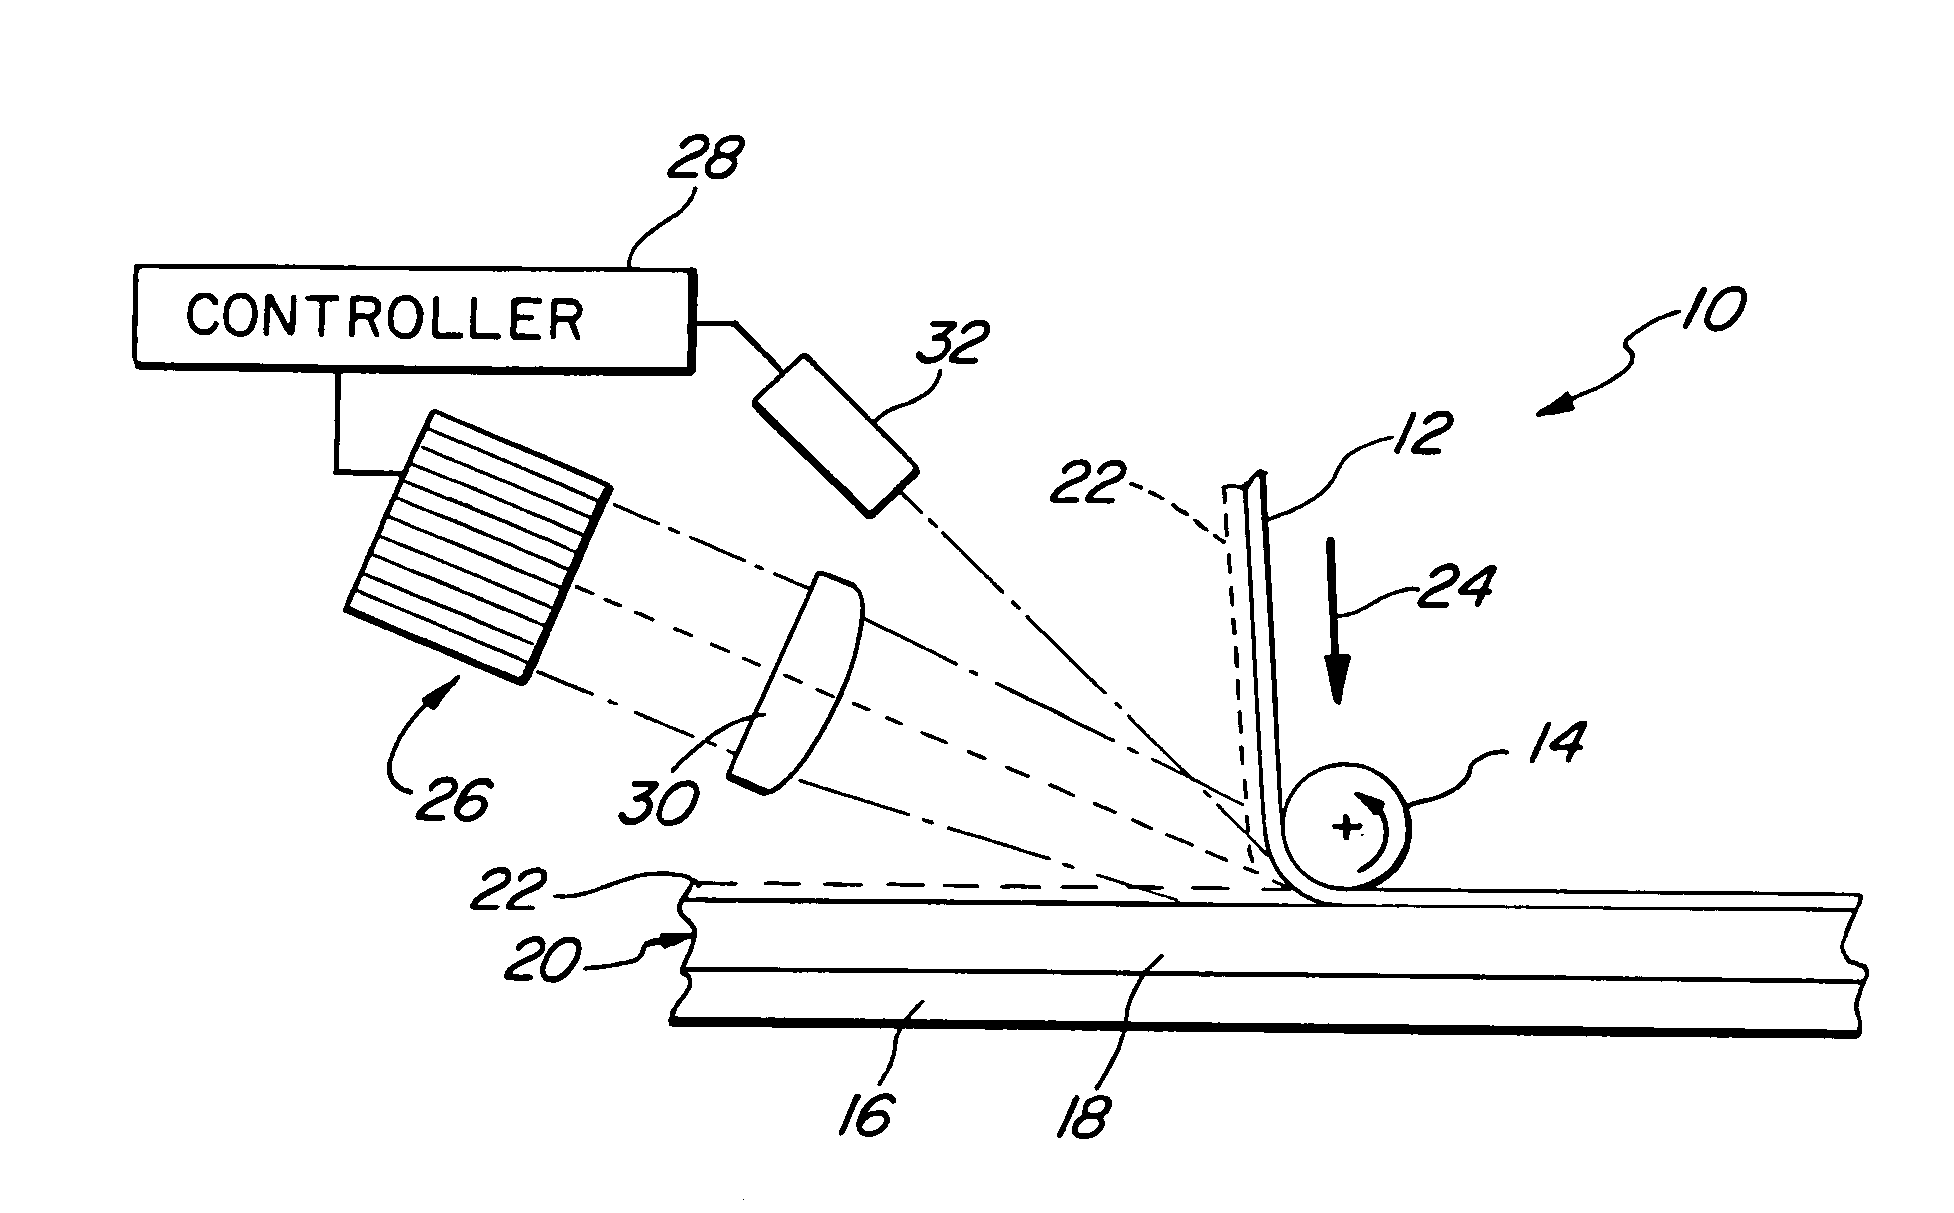 Laser-assisted placement of veiled composite material